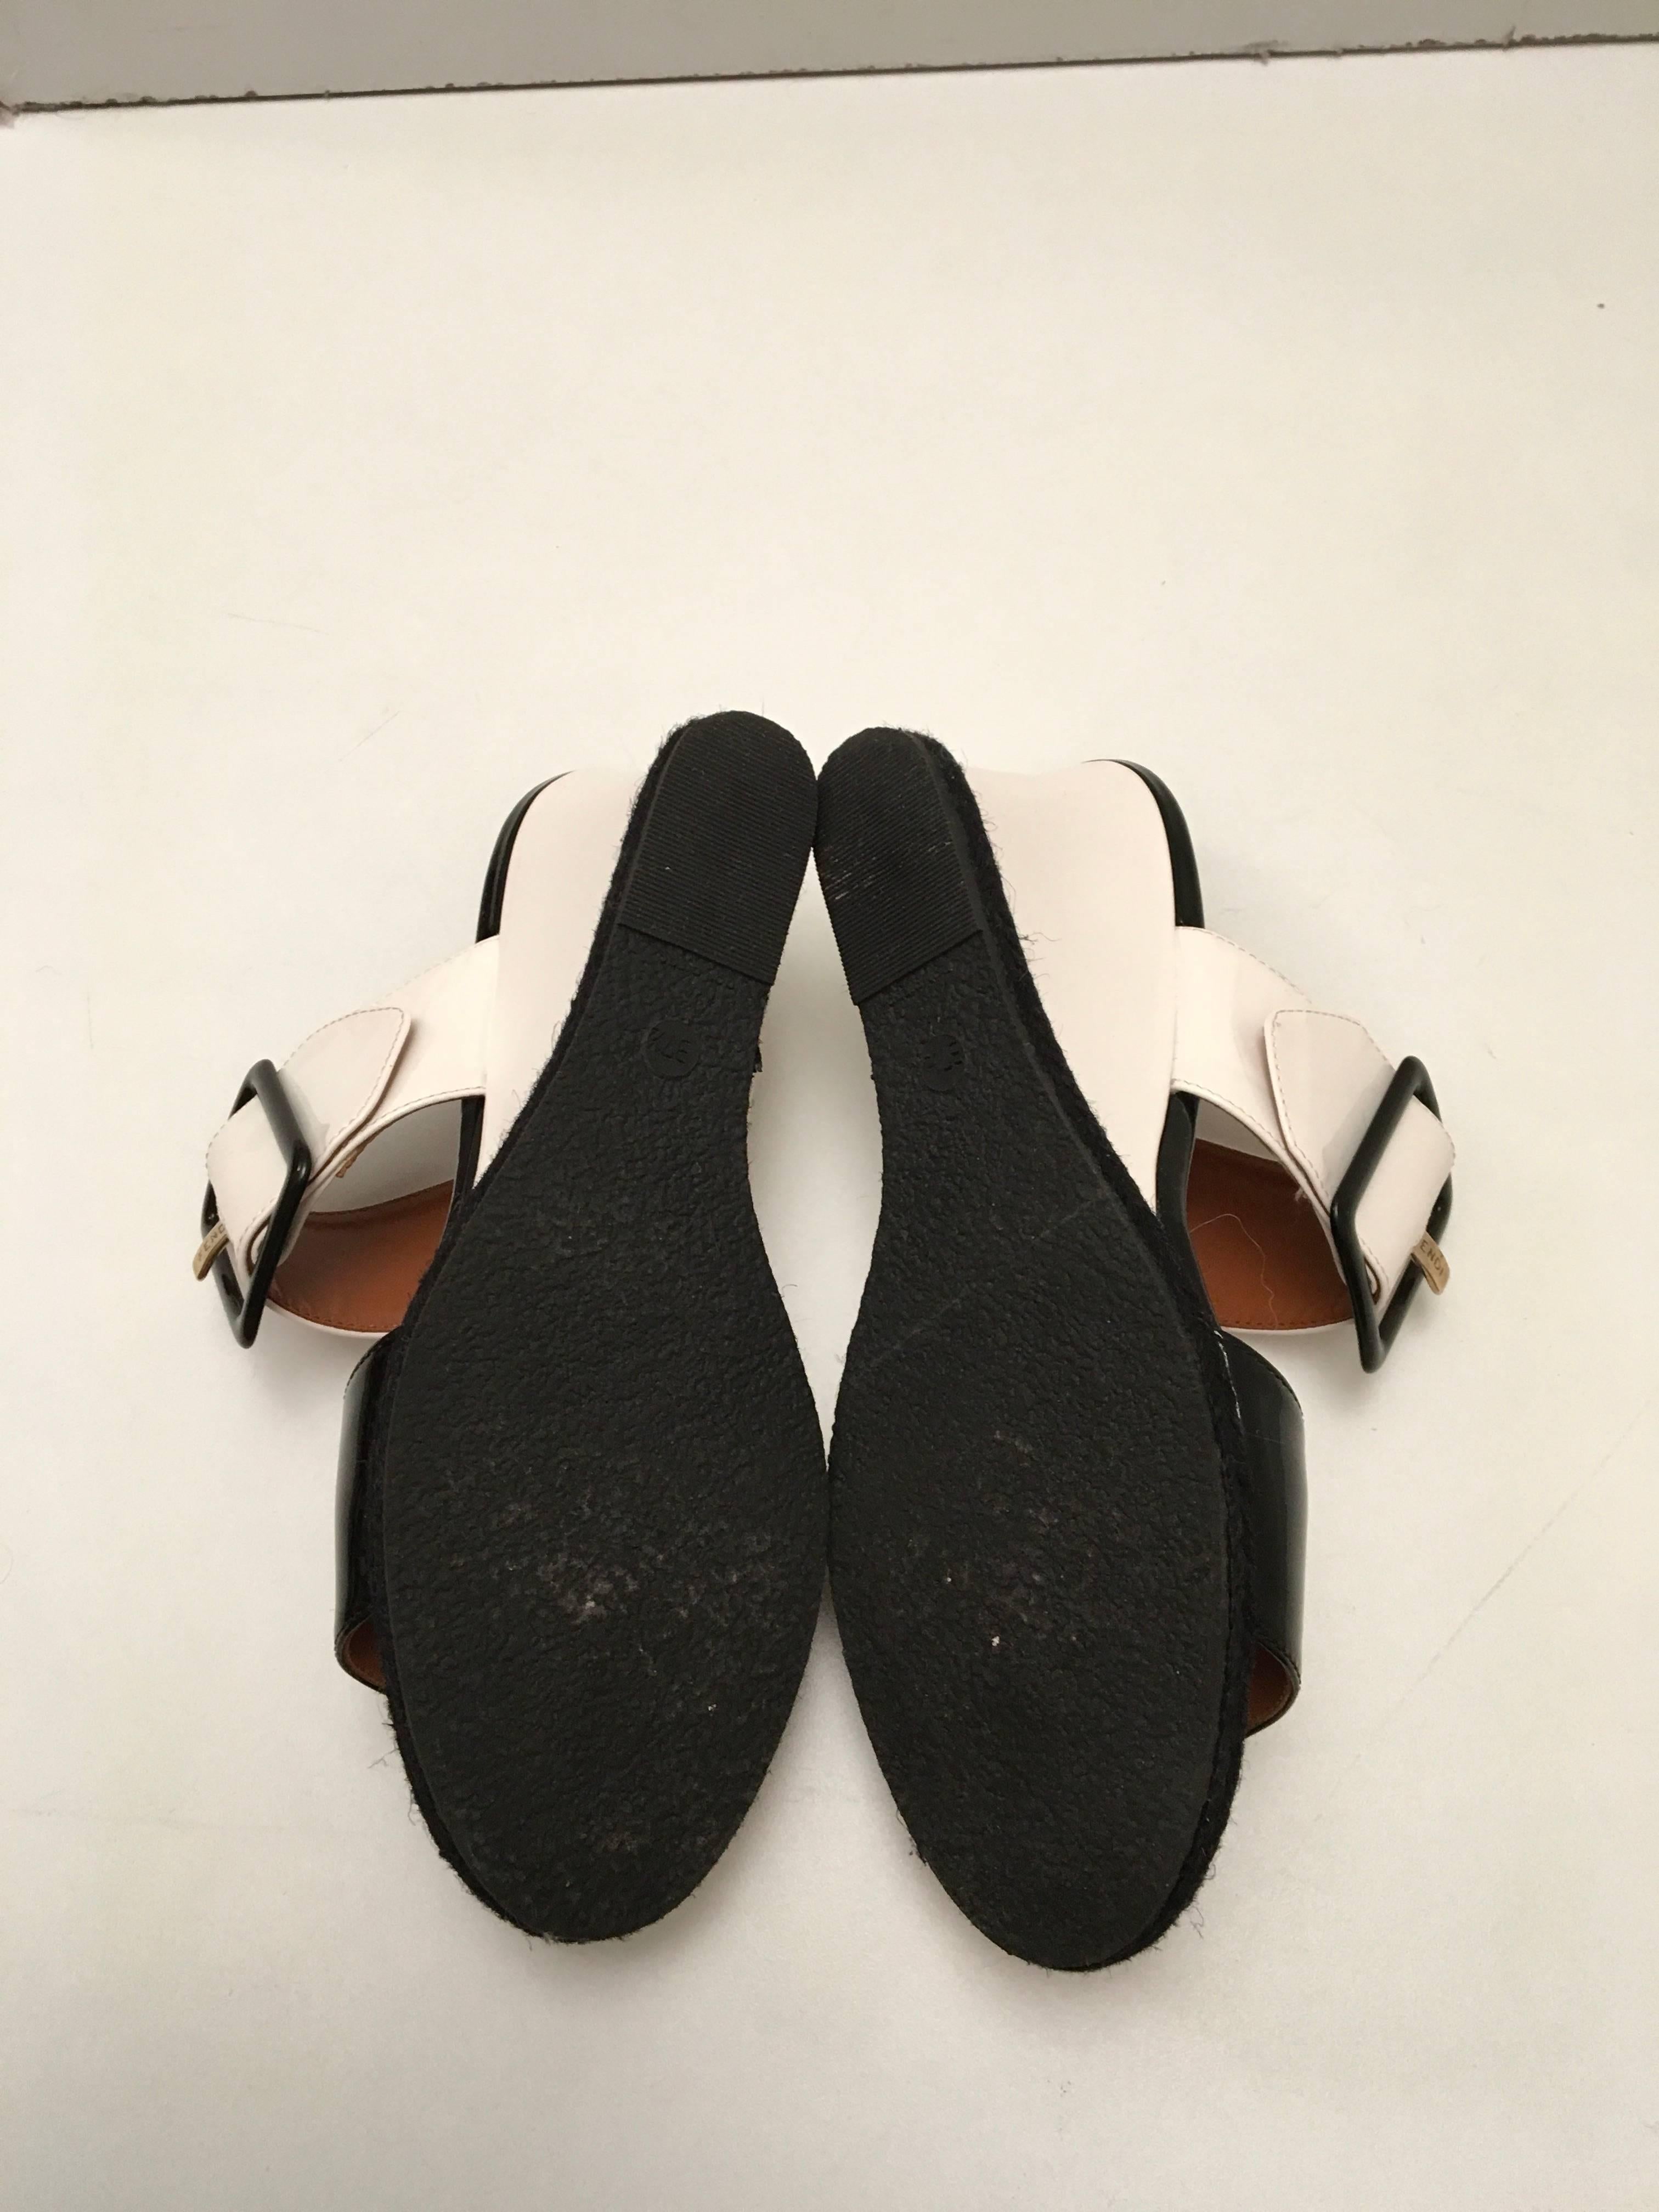 Fendi Patent Leather Wedges - Black and White - Size 37.5 For Sale 5